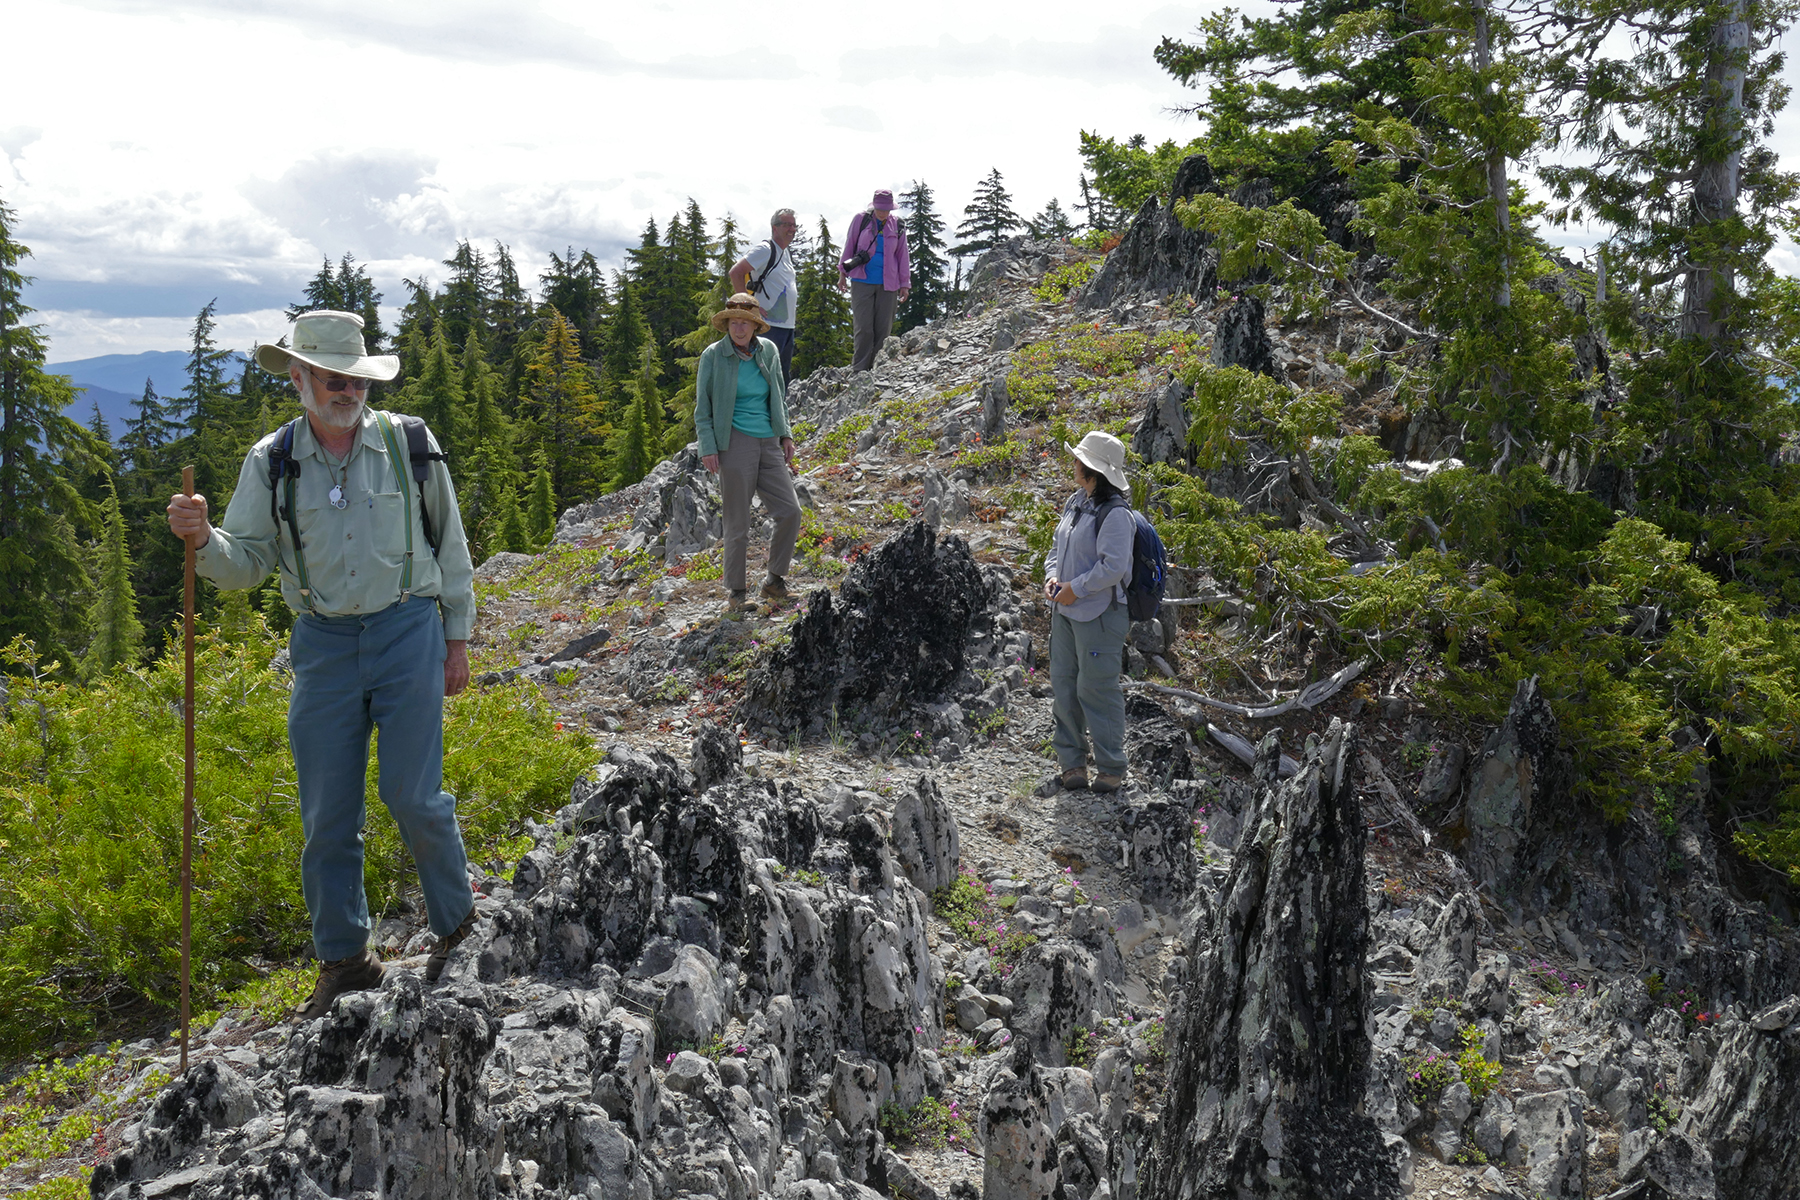 A group of people is shown walking over a rock terrain on a mountaintop